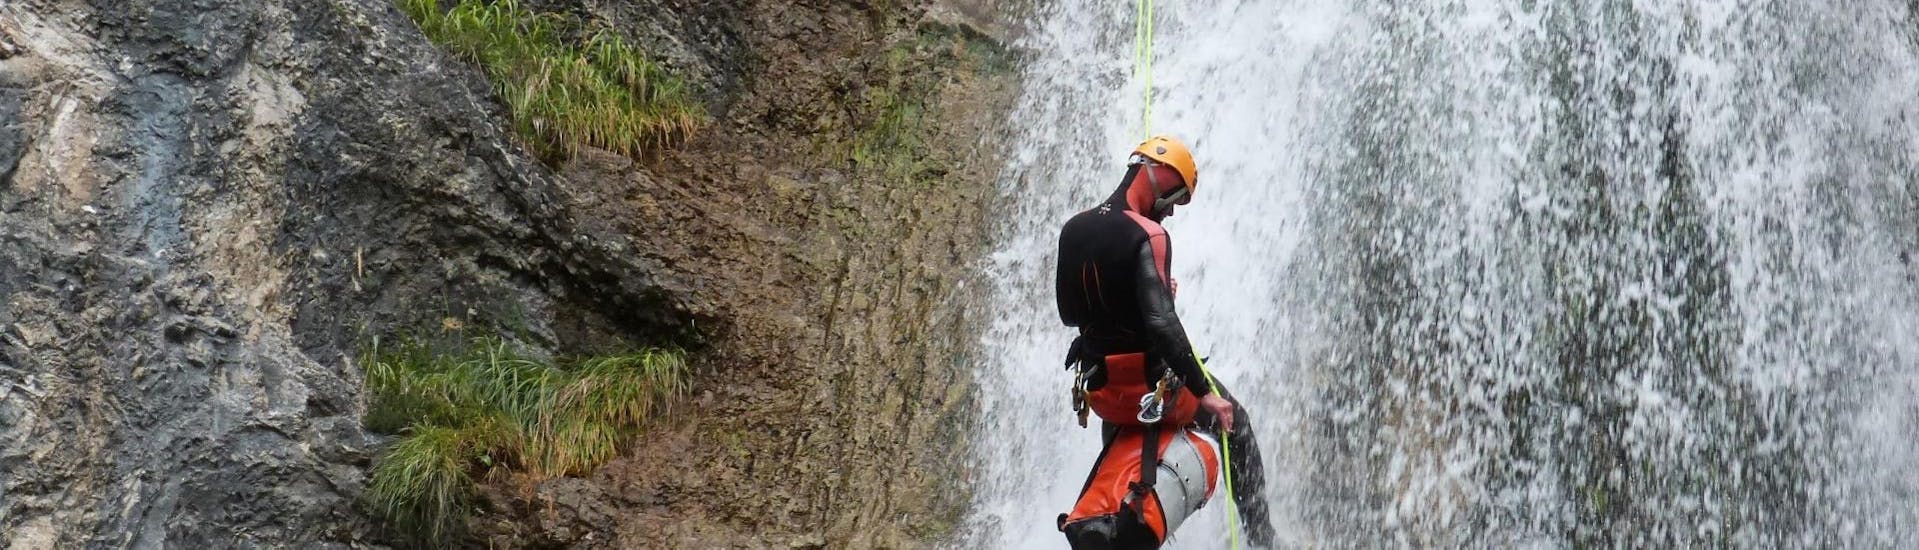 A guy is abseiling down a rock during the Canyoning "Redfox Short" - Enns Valley under the supervision of an experienced canyoning guide from best adventure company.